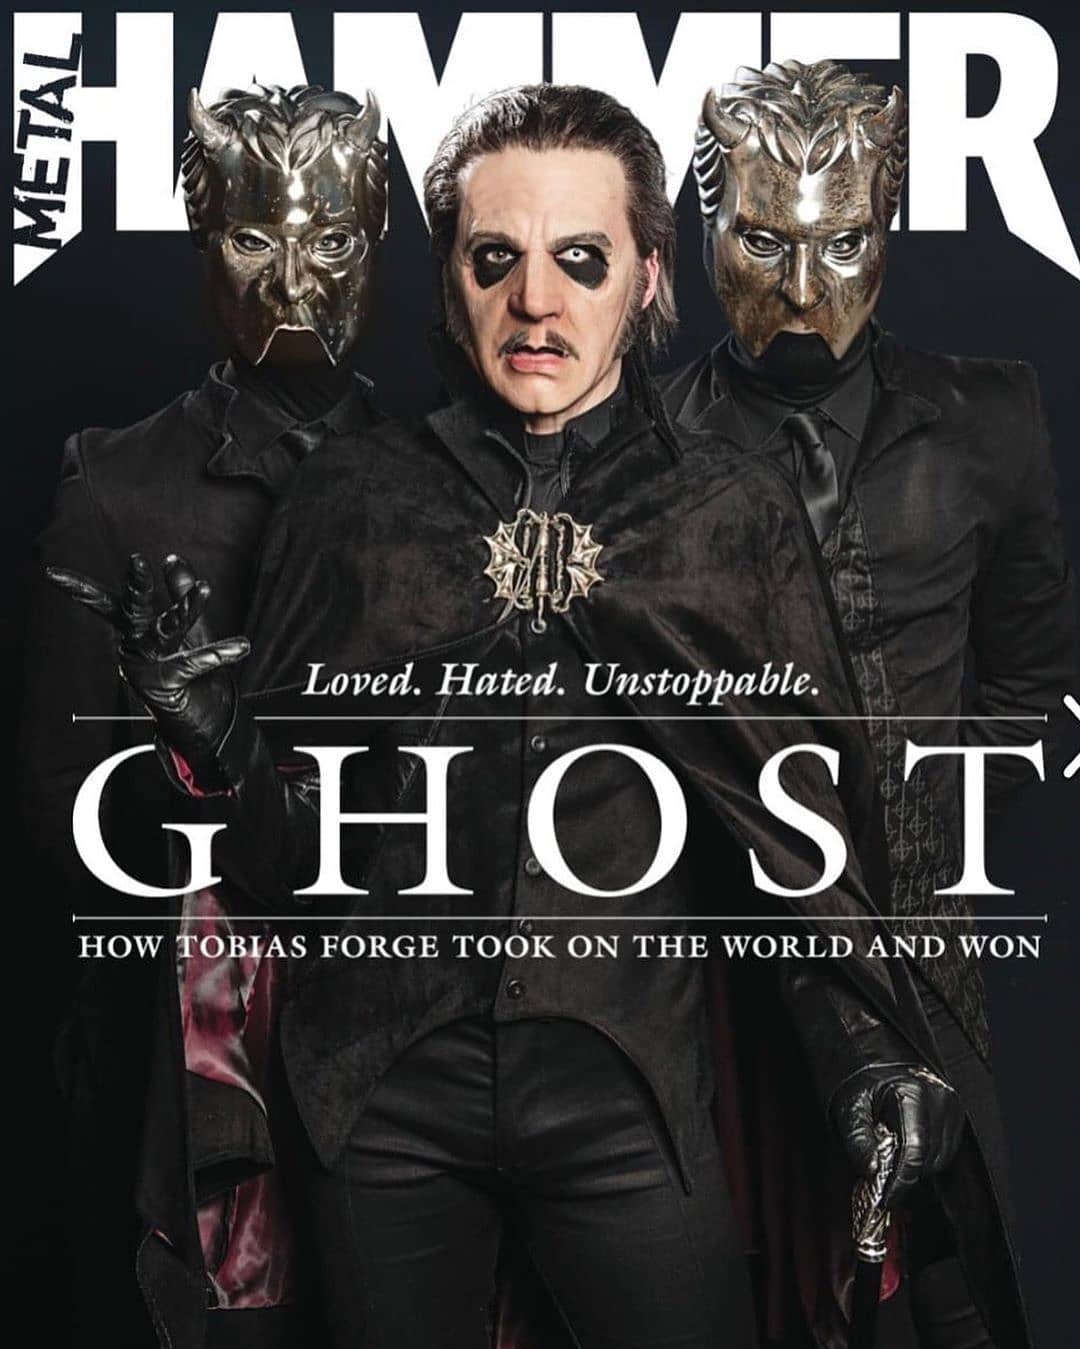 UK Metal Hammer Magazine #320 April 2019 - Ghost - Tobias Forge Cover #1